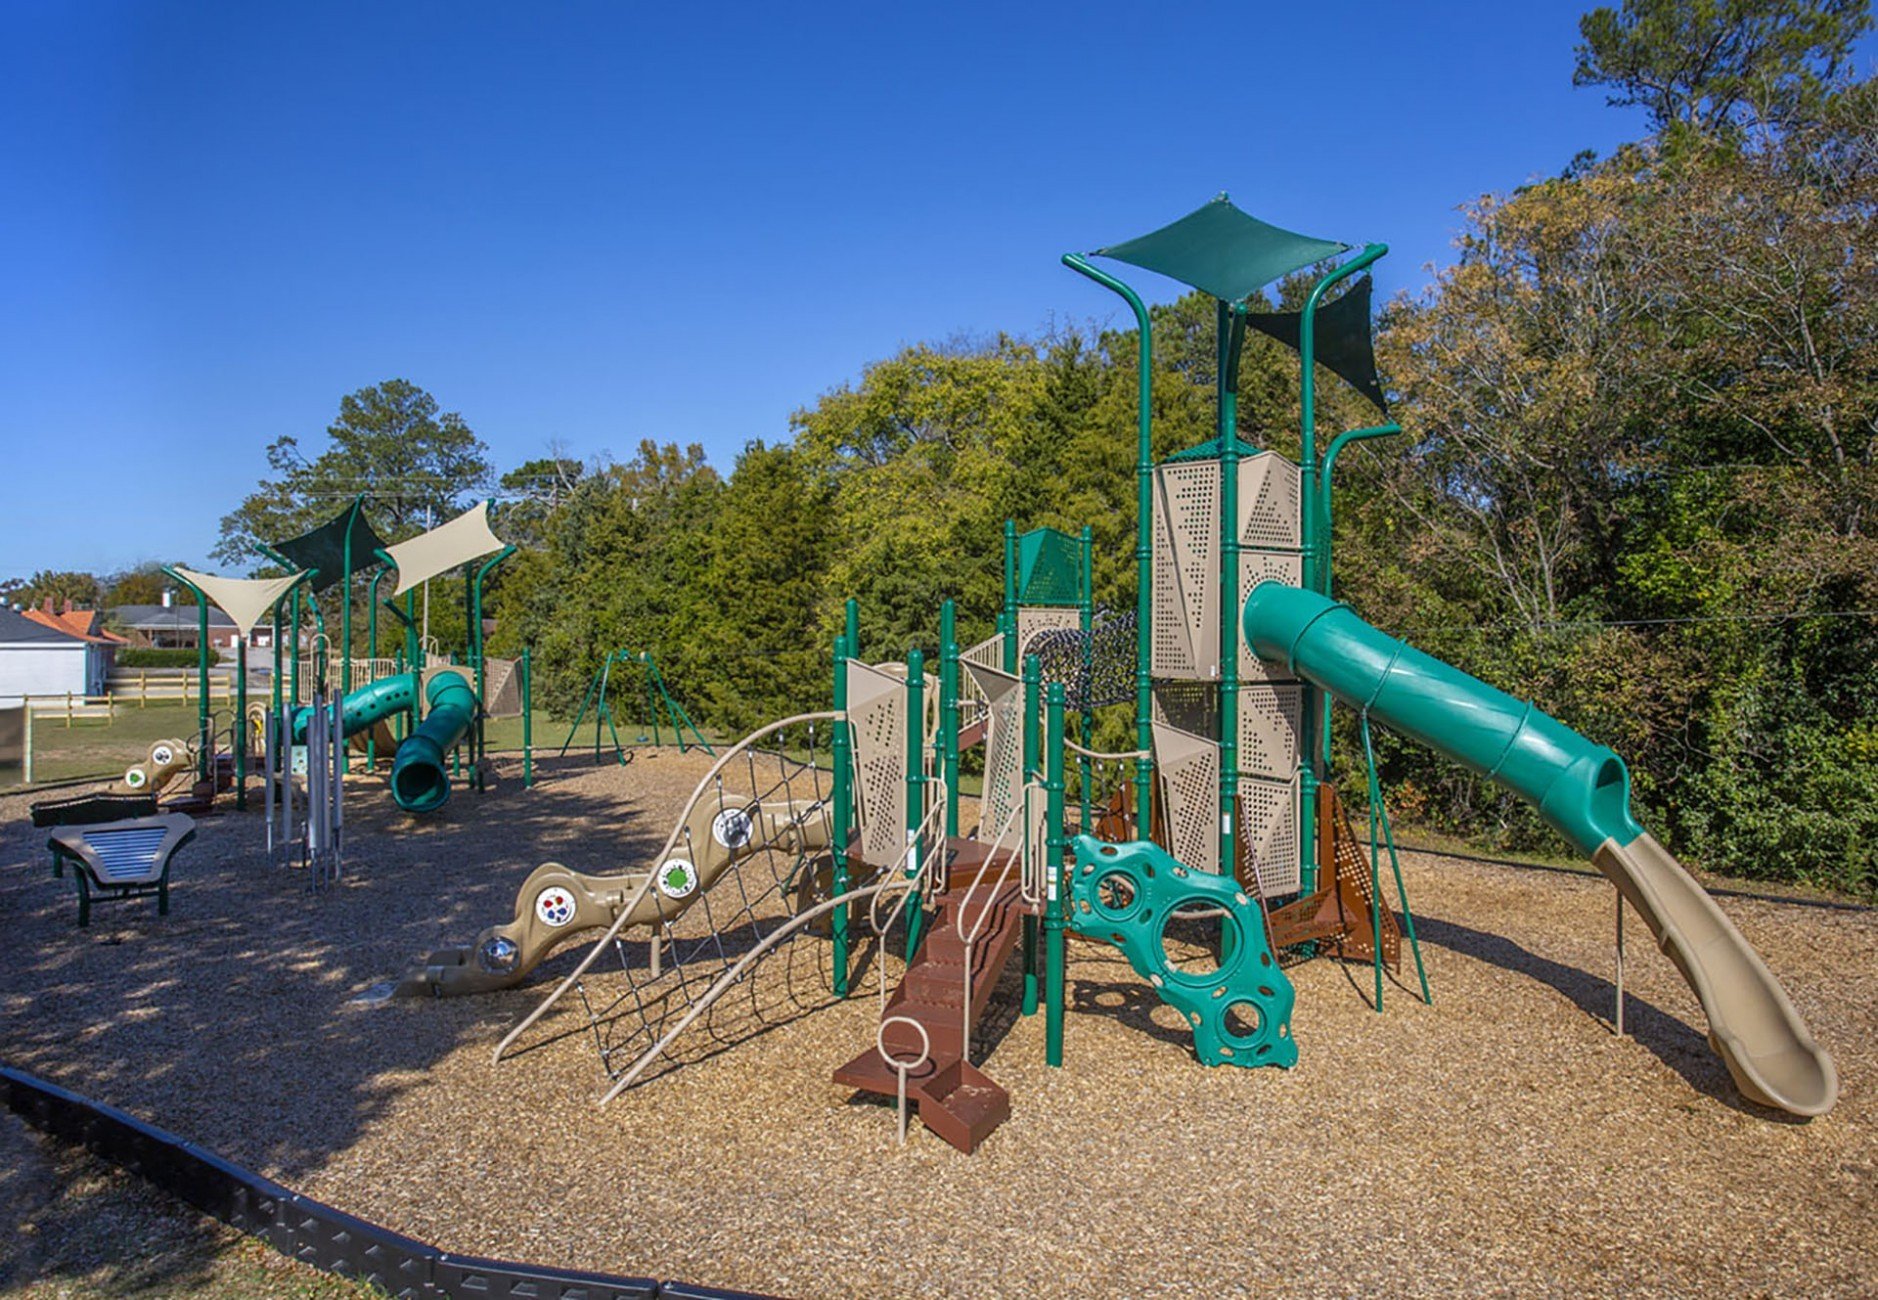 Featured image of Green and tan colored park in middle of trees